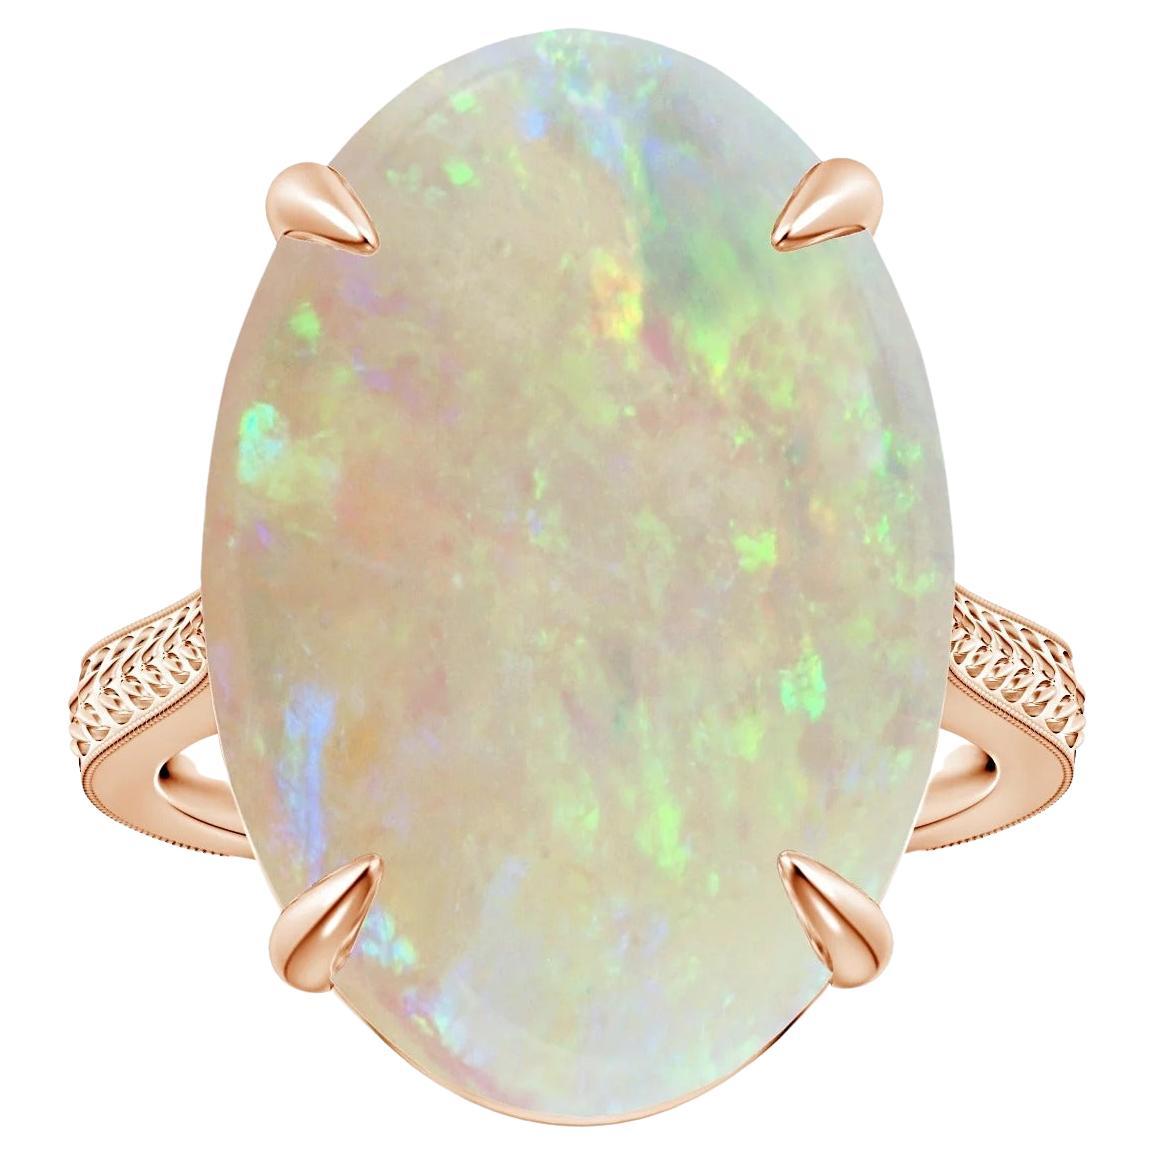 For Sale:  ANGARA GIA Certified Solitaire Opal Ring in Rose Gold with Leaf Motifs